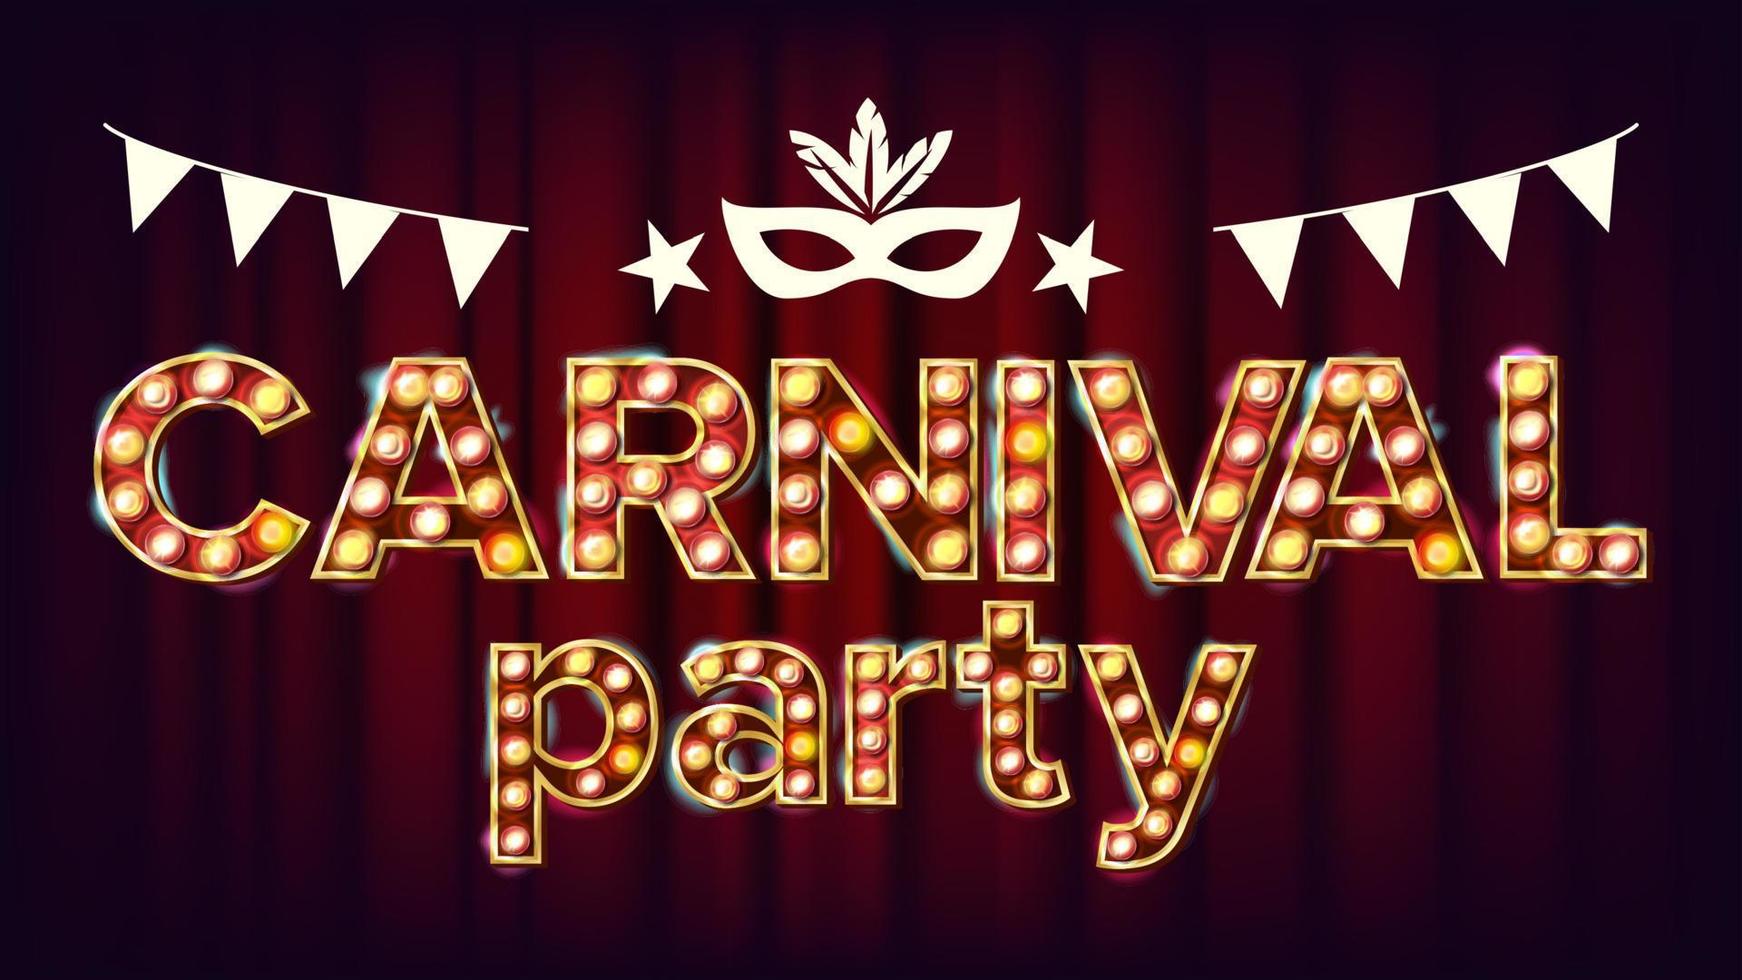 Carnival Party Poster Vector. Carnival 3D Glowing Element. For Masquerade Invitation Design. Vintage Illustration vector